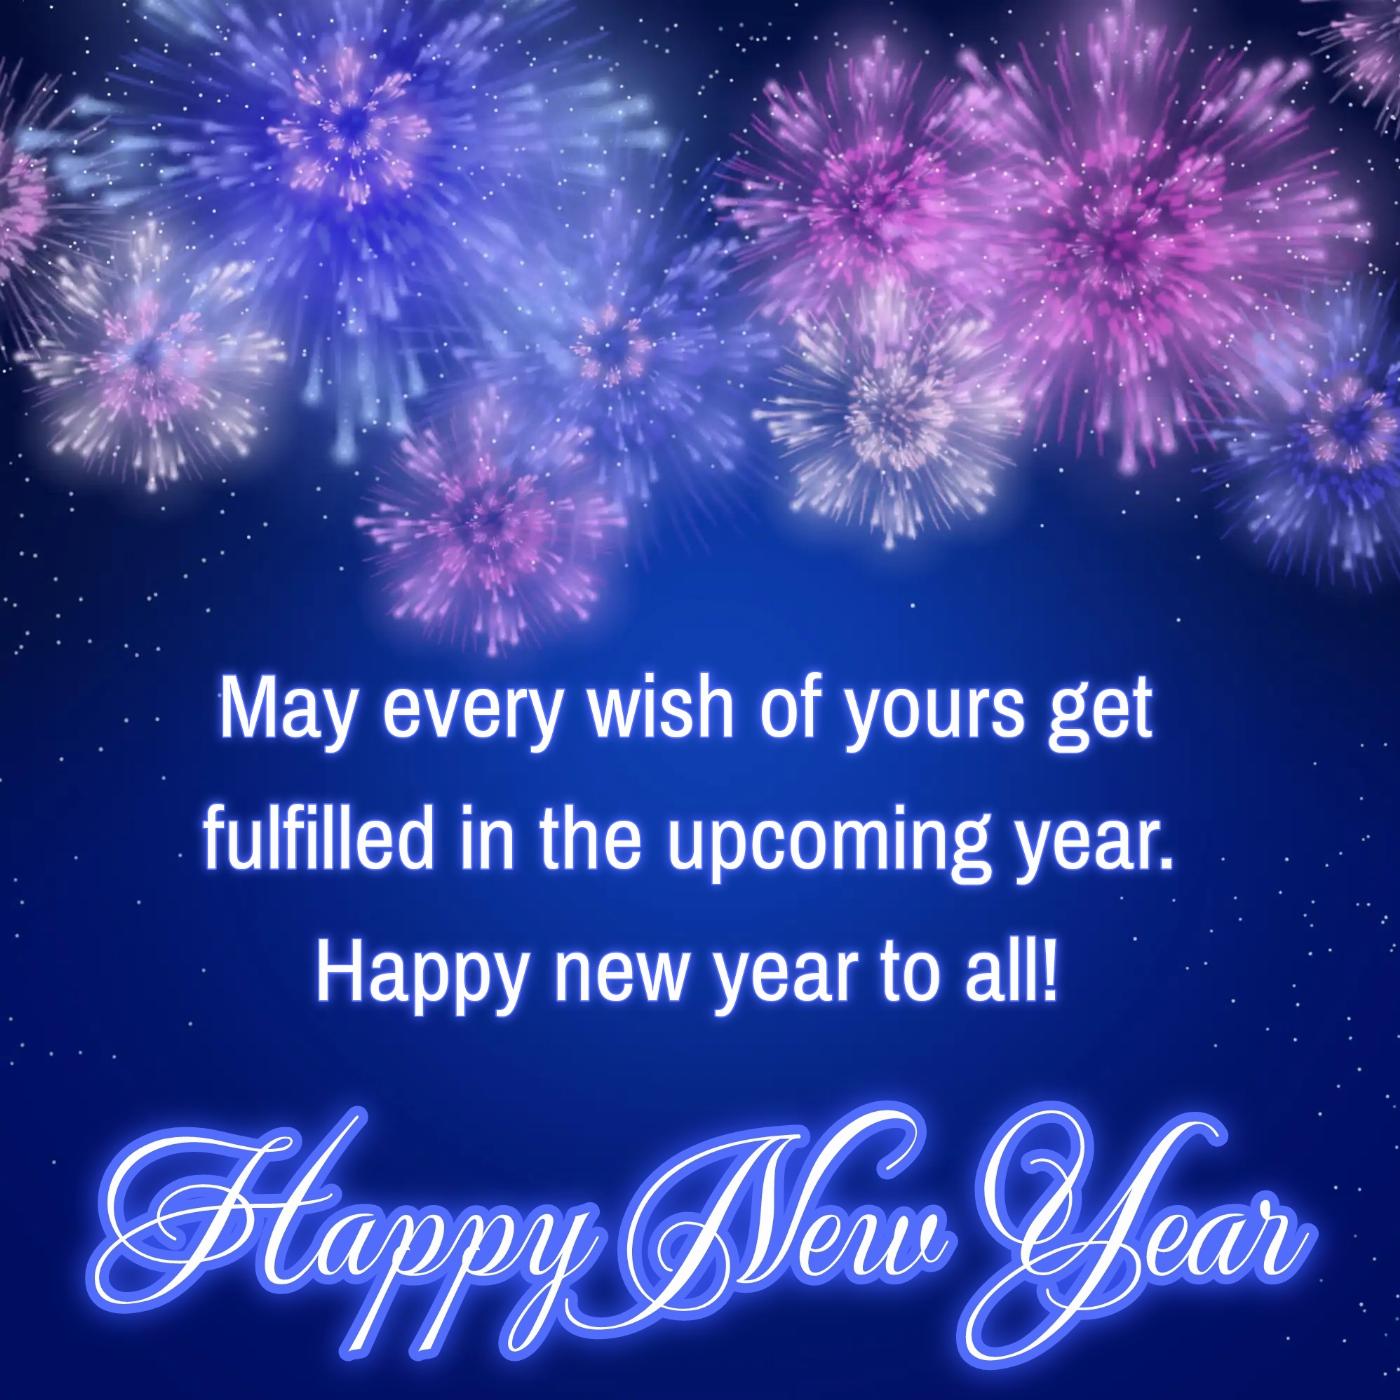 May every wish of yours get fulfilled in the upcoming year